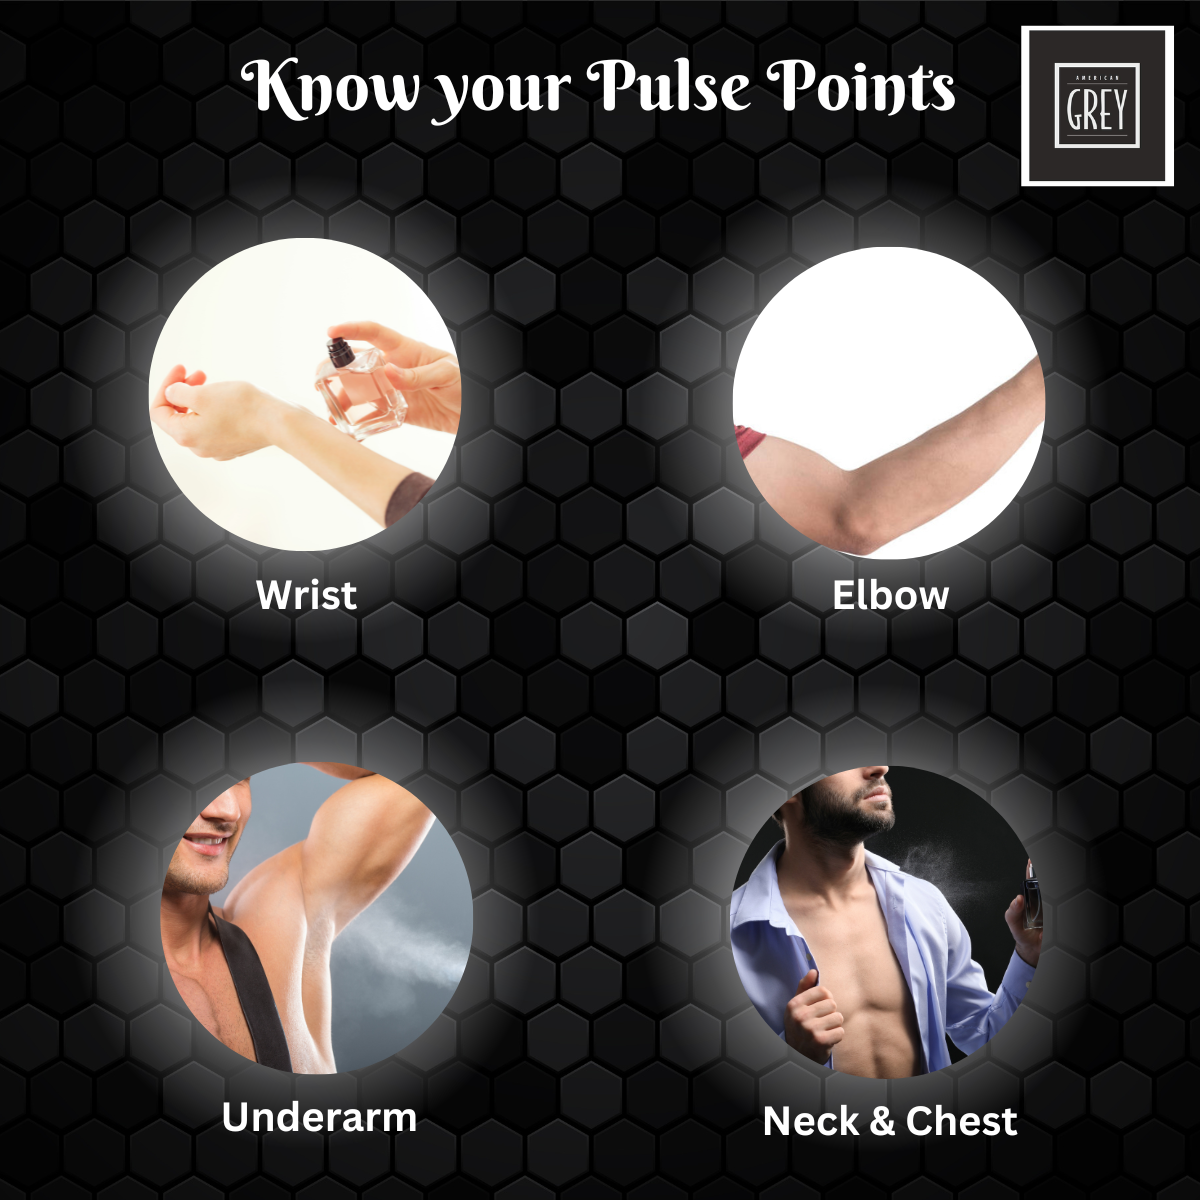 know your pulse points, pulse points, american grey signature club deo, deo spray for men, , deo spray for him, what are the pulse points to apply deodorant for men, men deodorant, deodorant spray for men, what are the pulse points for perfume male?, what is the best way to apply perfume for men?, where are male pulse points, deodorant tips for men, deodorant tips for male in india, perfume pulse points myths, best pulse points for perfume male, top rated mens deo, men grooming essential, men fragrance for winter season, best deo for cold weather, popular winter deodorant for men, best smelling deo for winter season, best evening wear for men